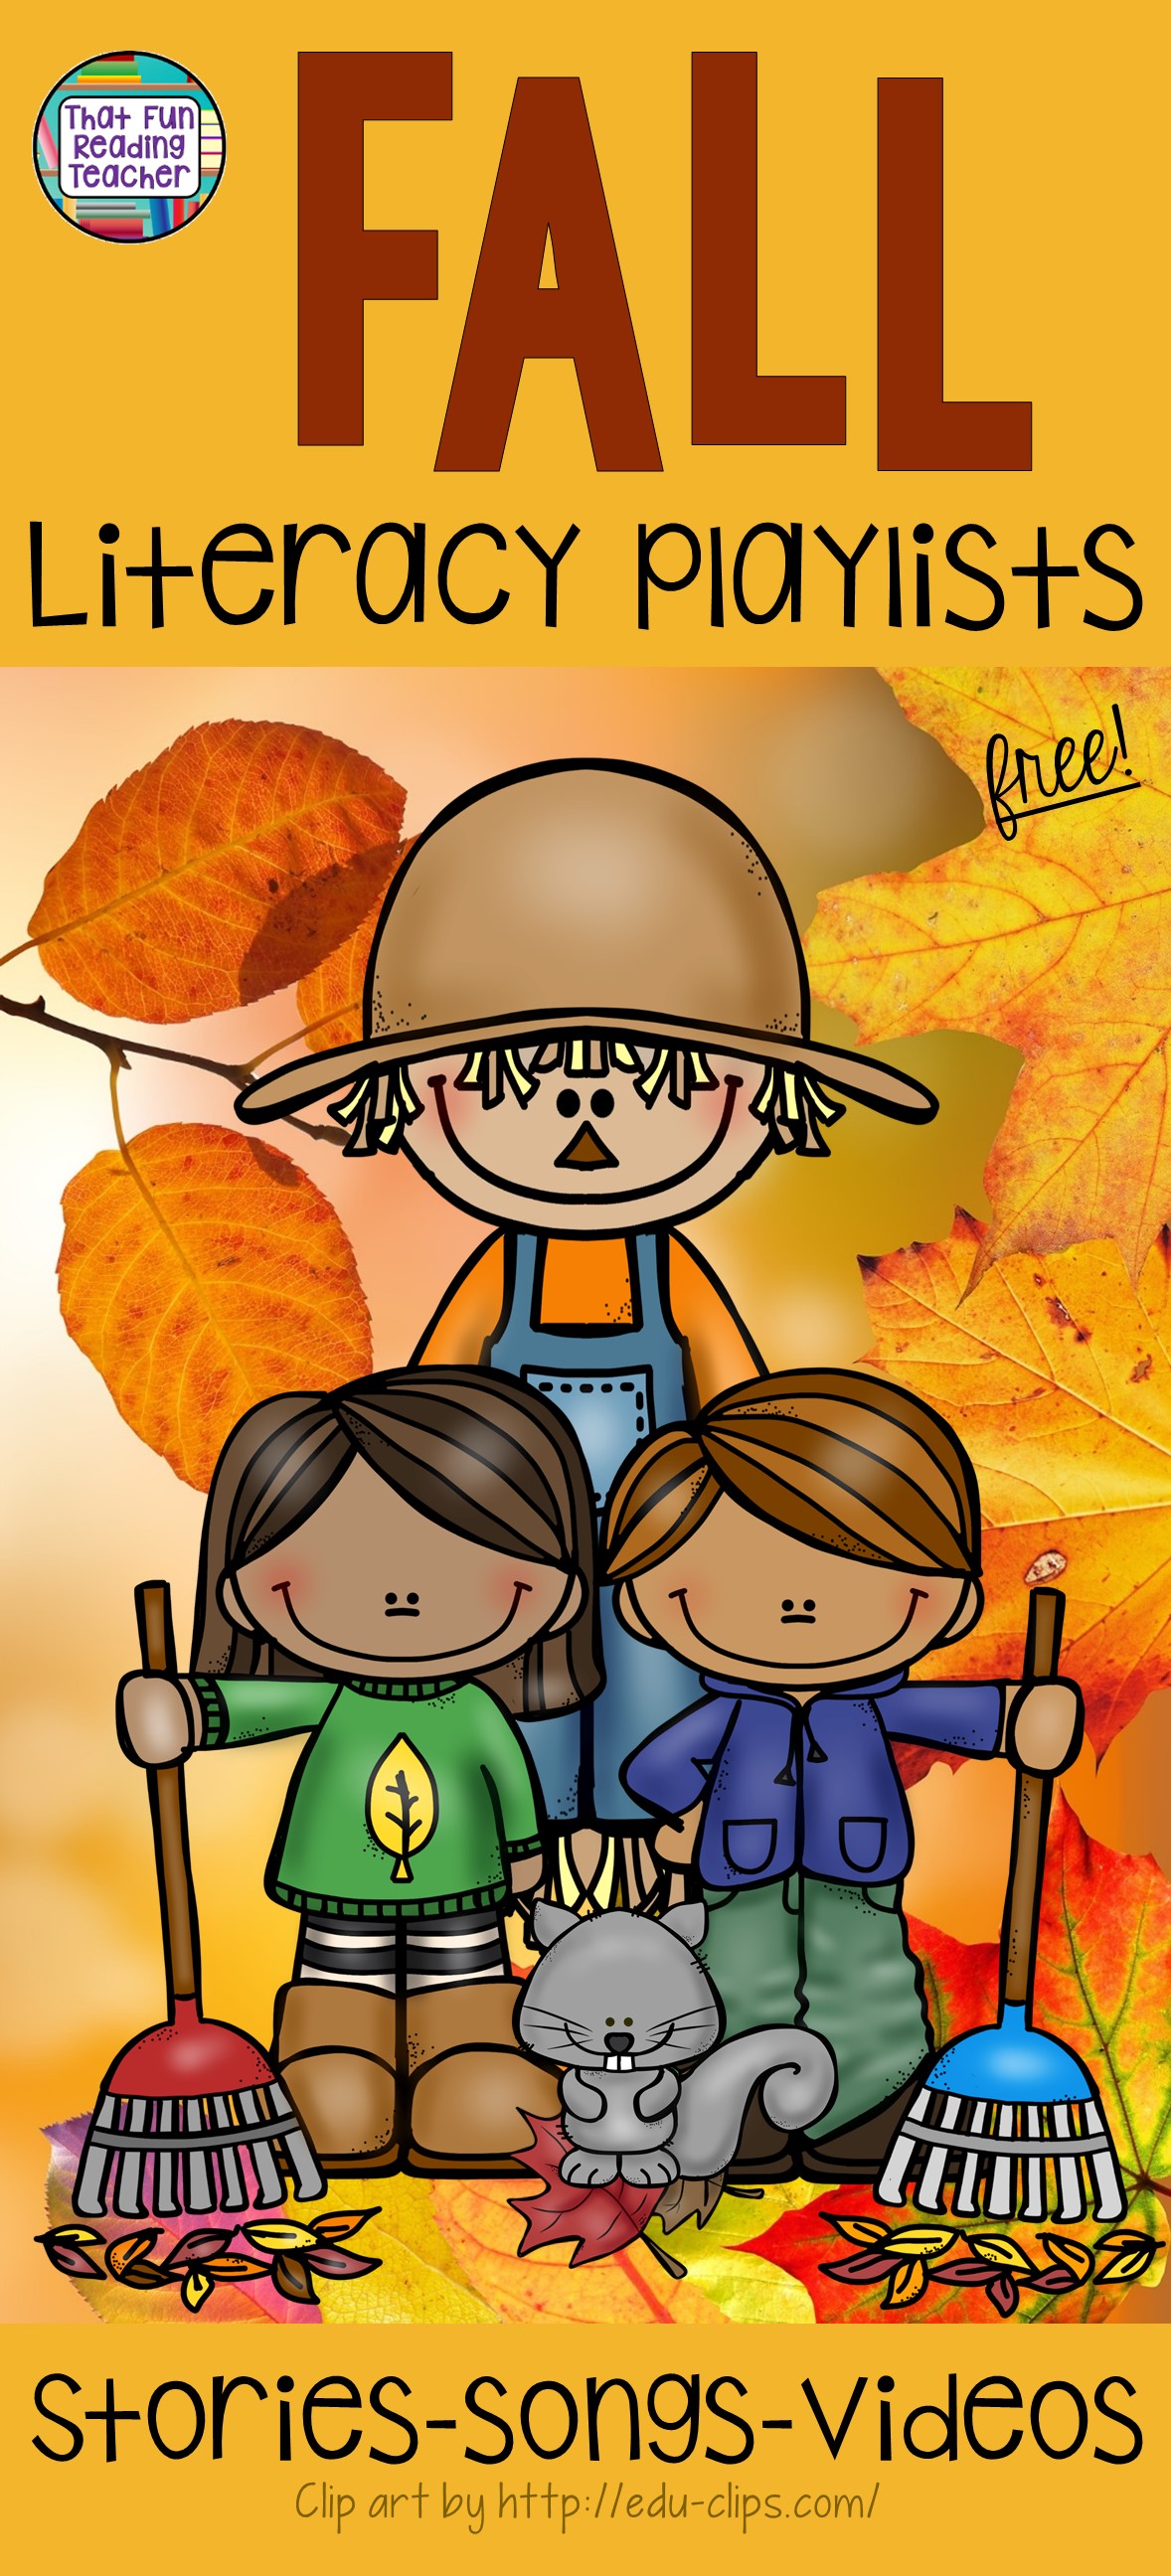 Free Fall Literacy playlists - stories, songs, poems, videos about Autumn, Halloween, Thanksgiving & Remembrance / Veterans Day on That Fun Reading Teacher.com